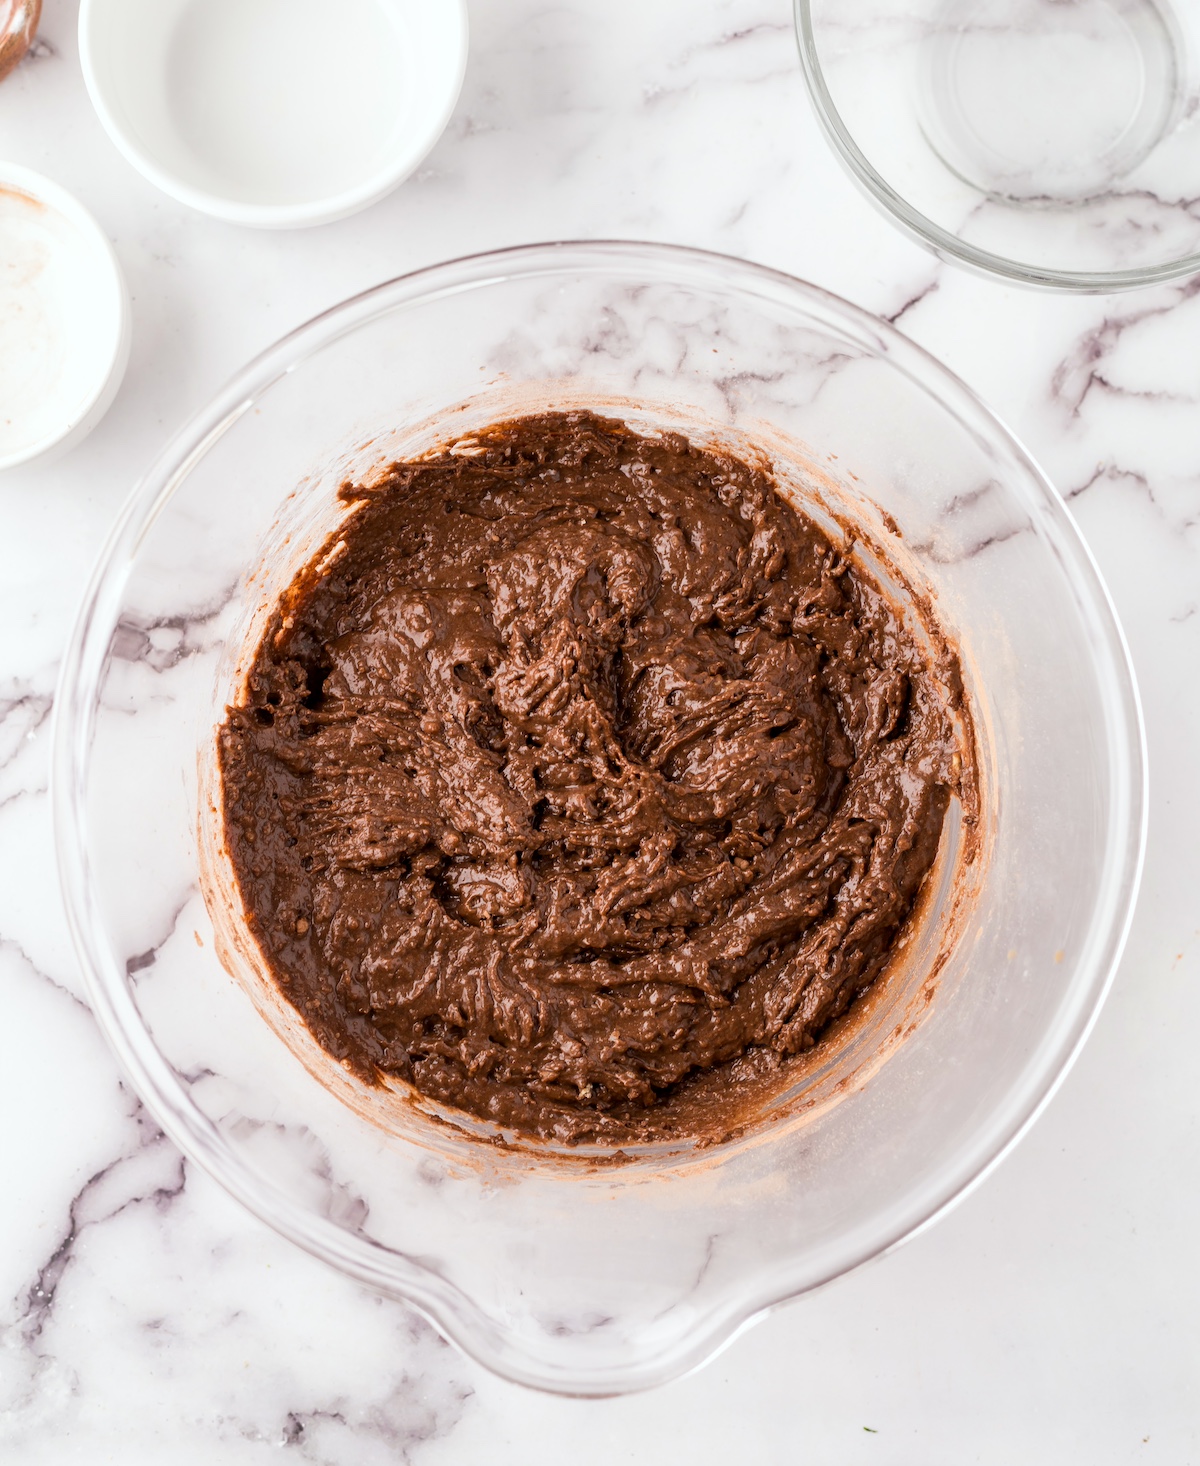 Flour, cocoa powder, sugar, and baking soda mixed with the wet ingredients in the bowl